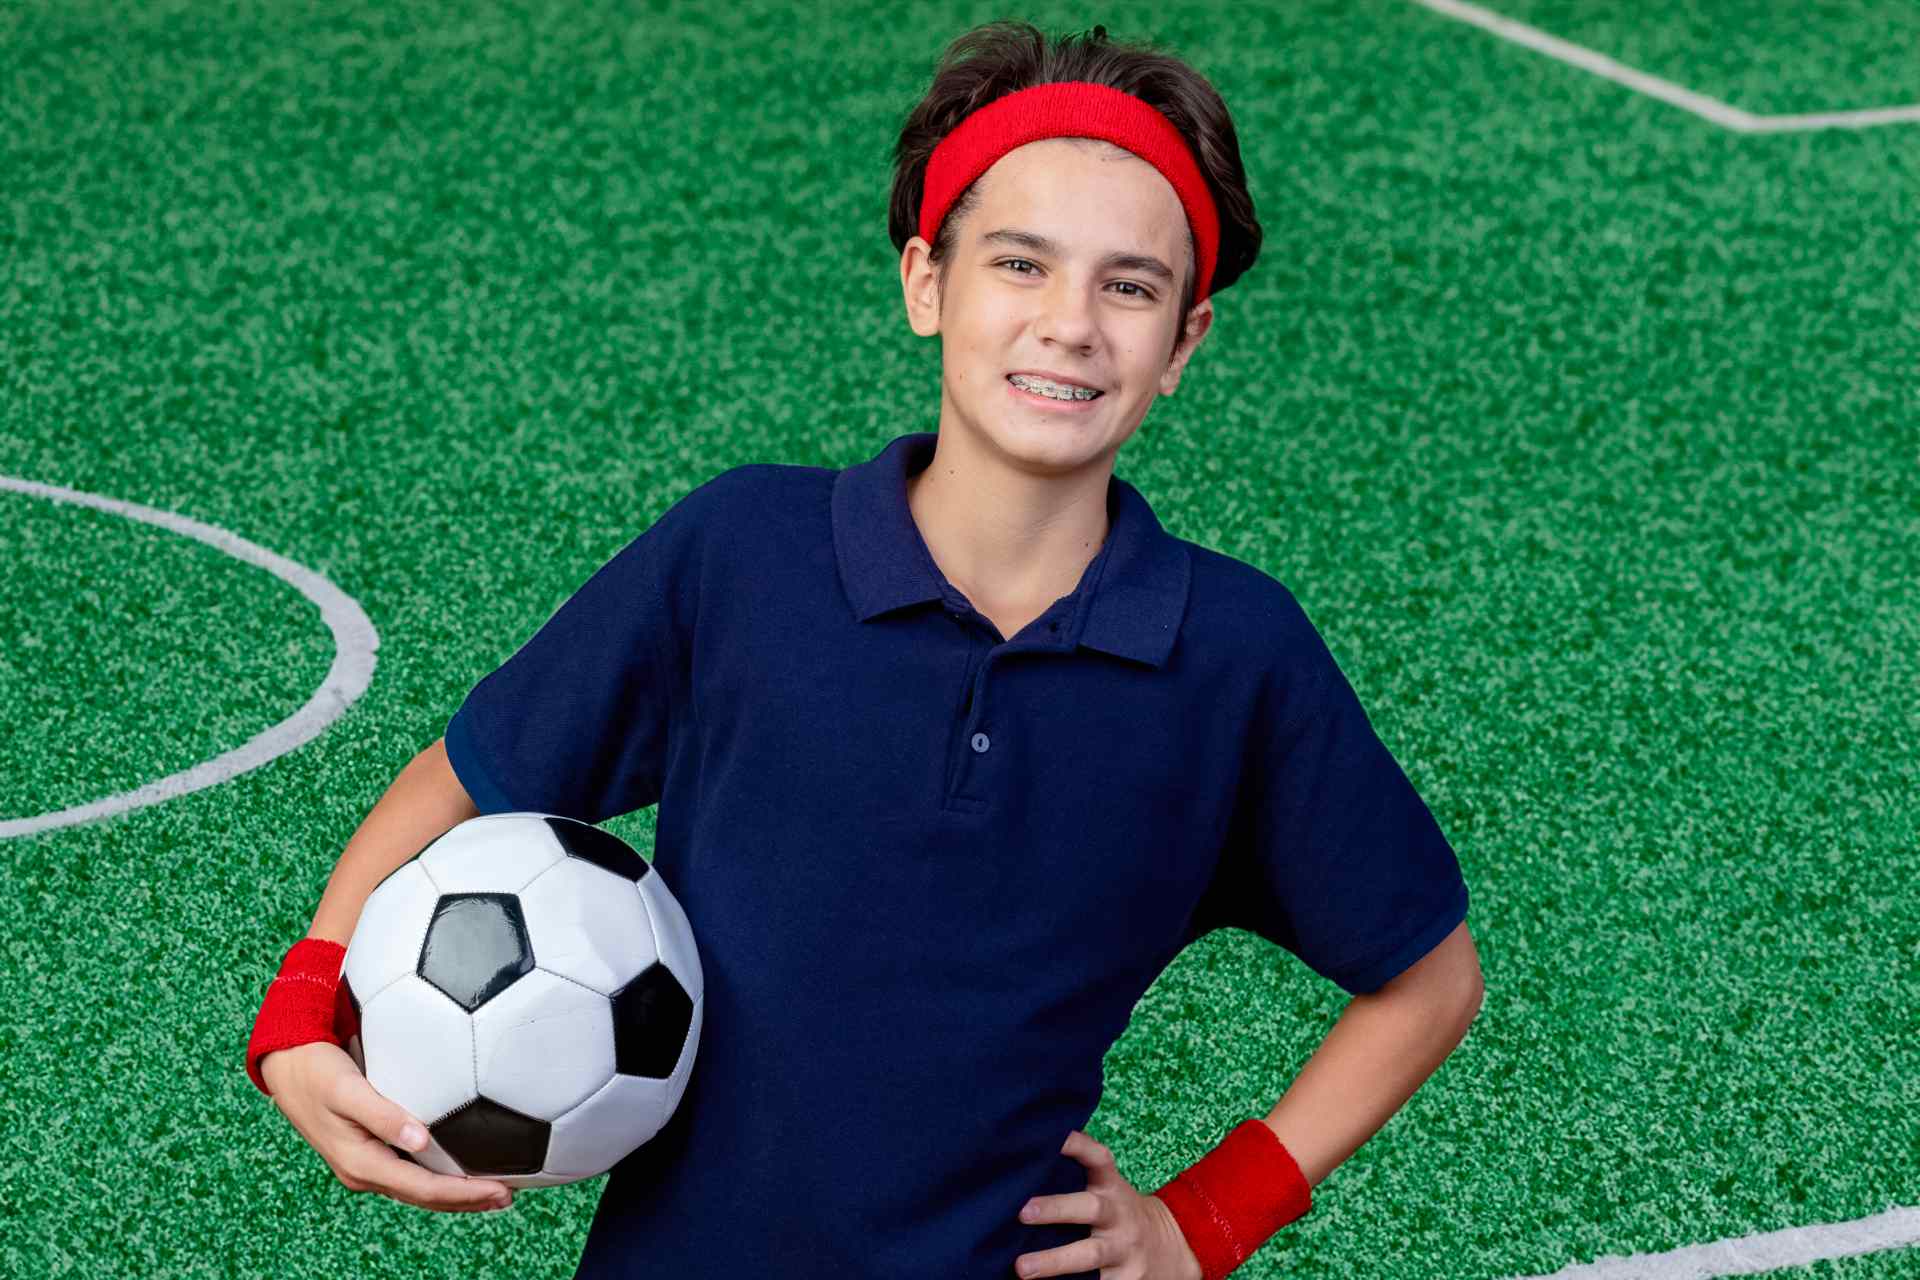 Teenager on a soccer field with braces holding a soccer ball.